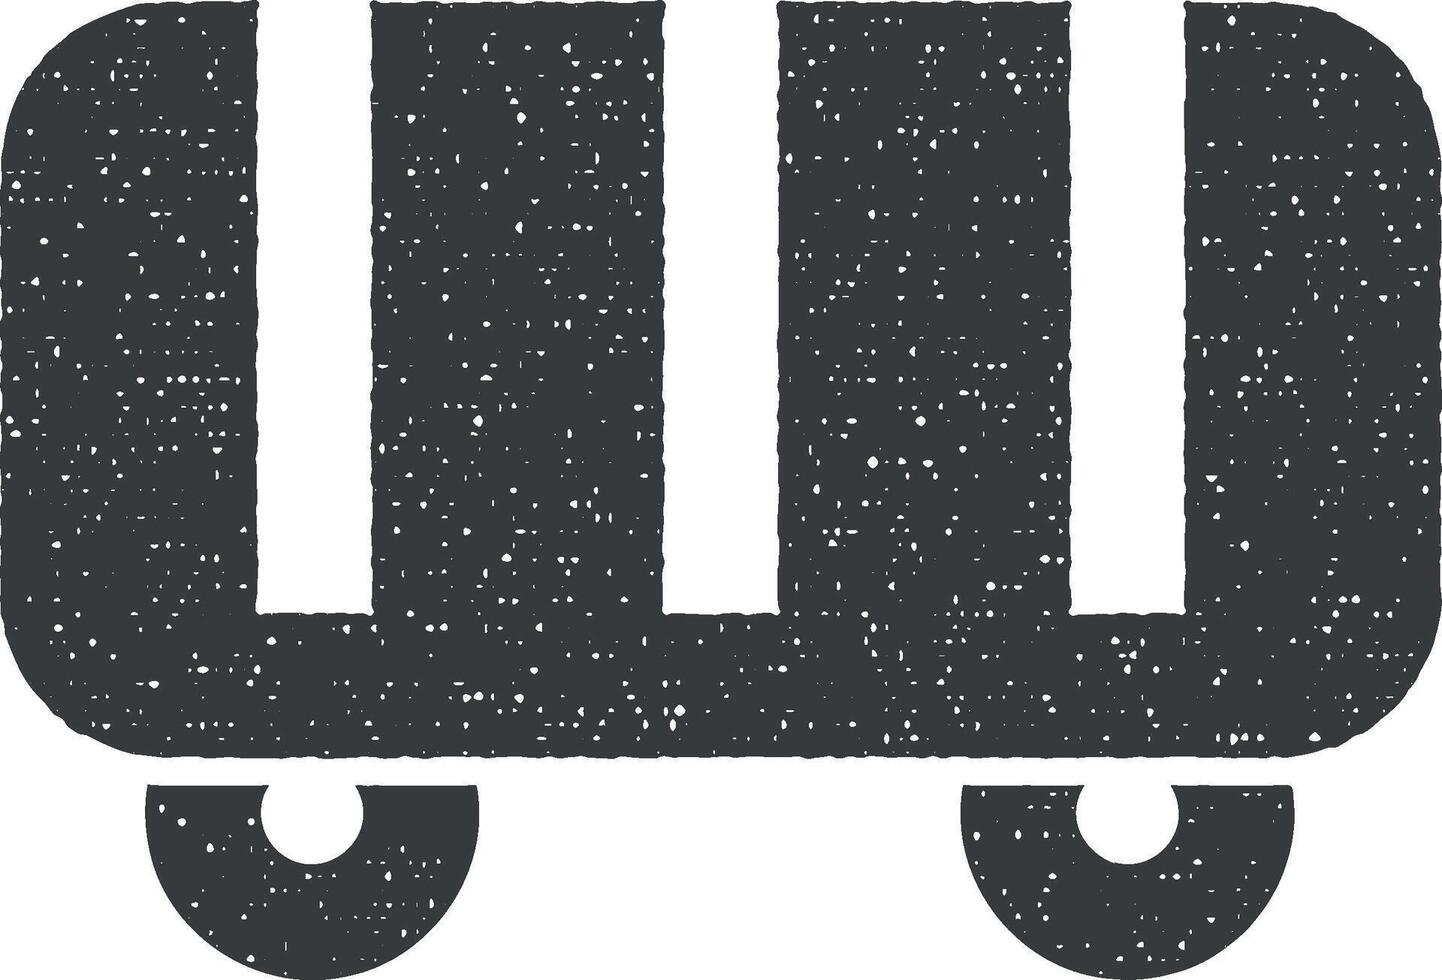 Cargo, railroad, wagon vector icon illustration with stamp effect